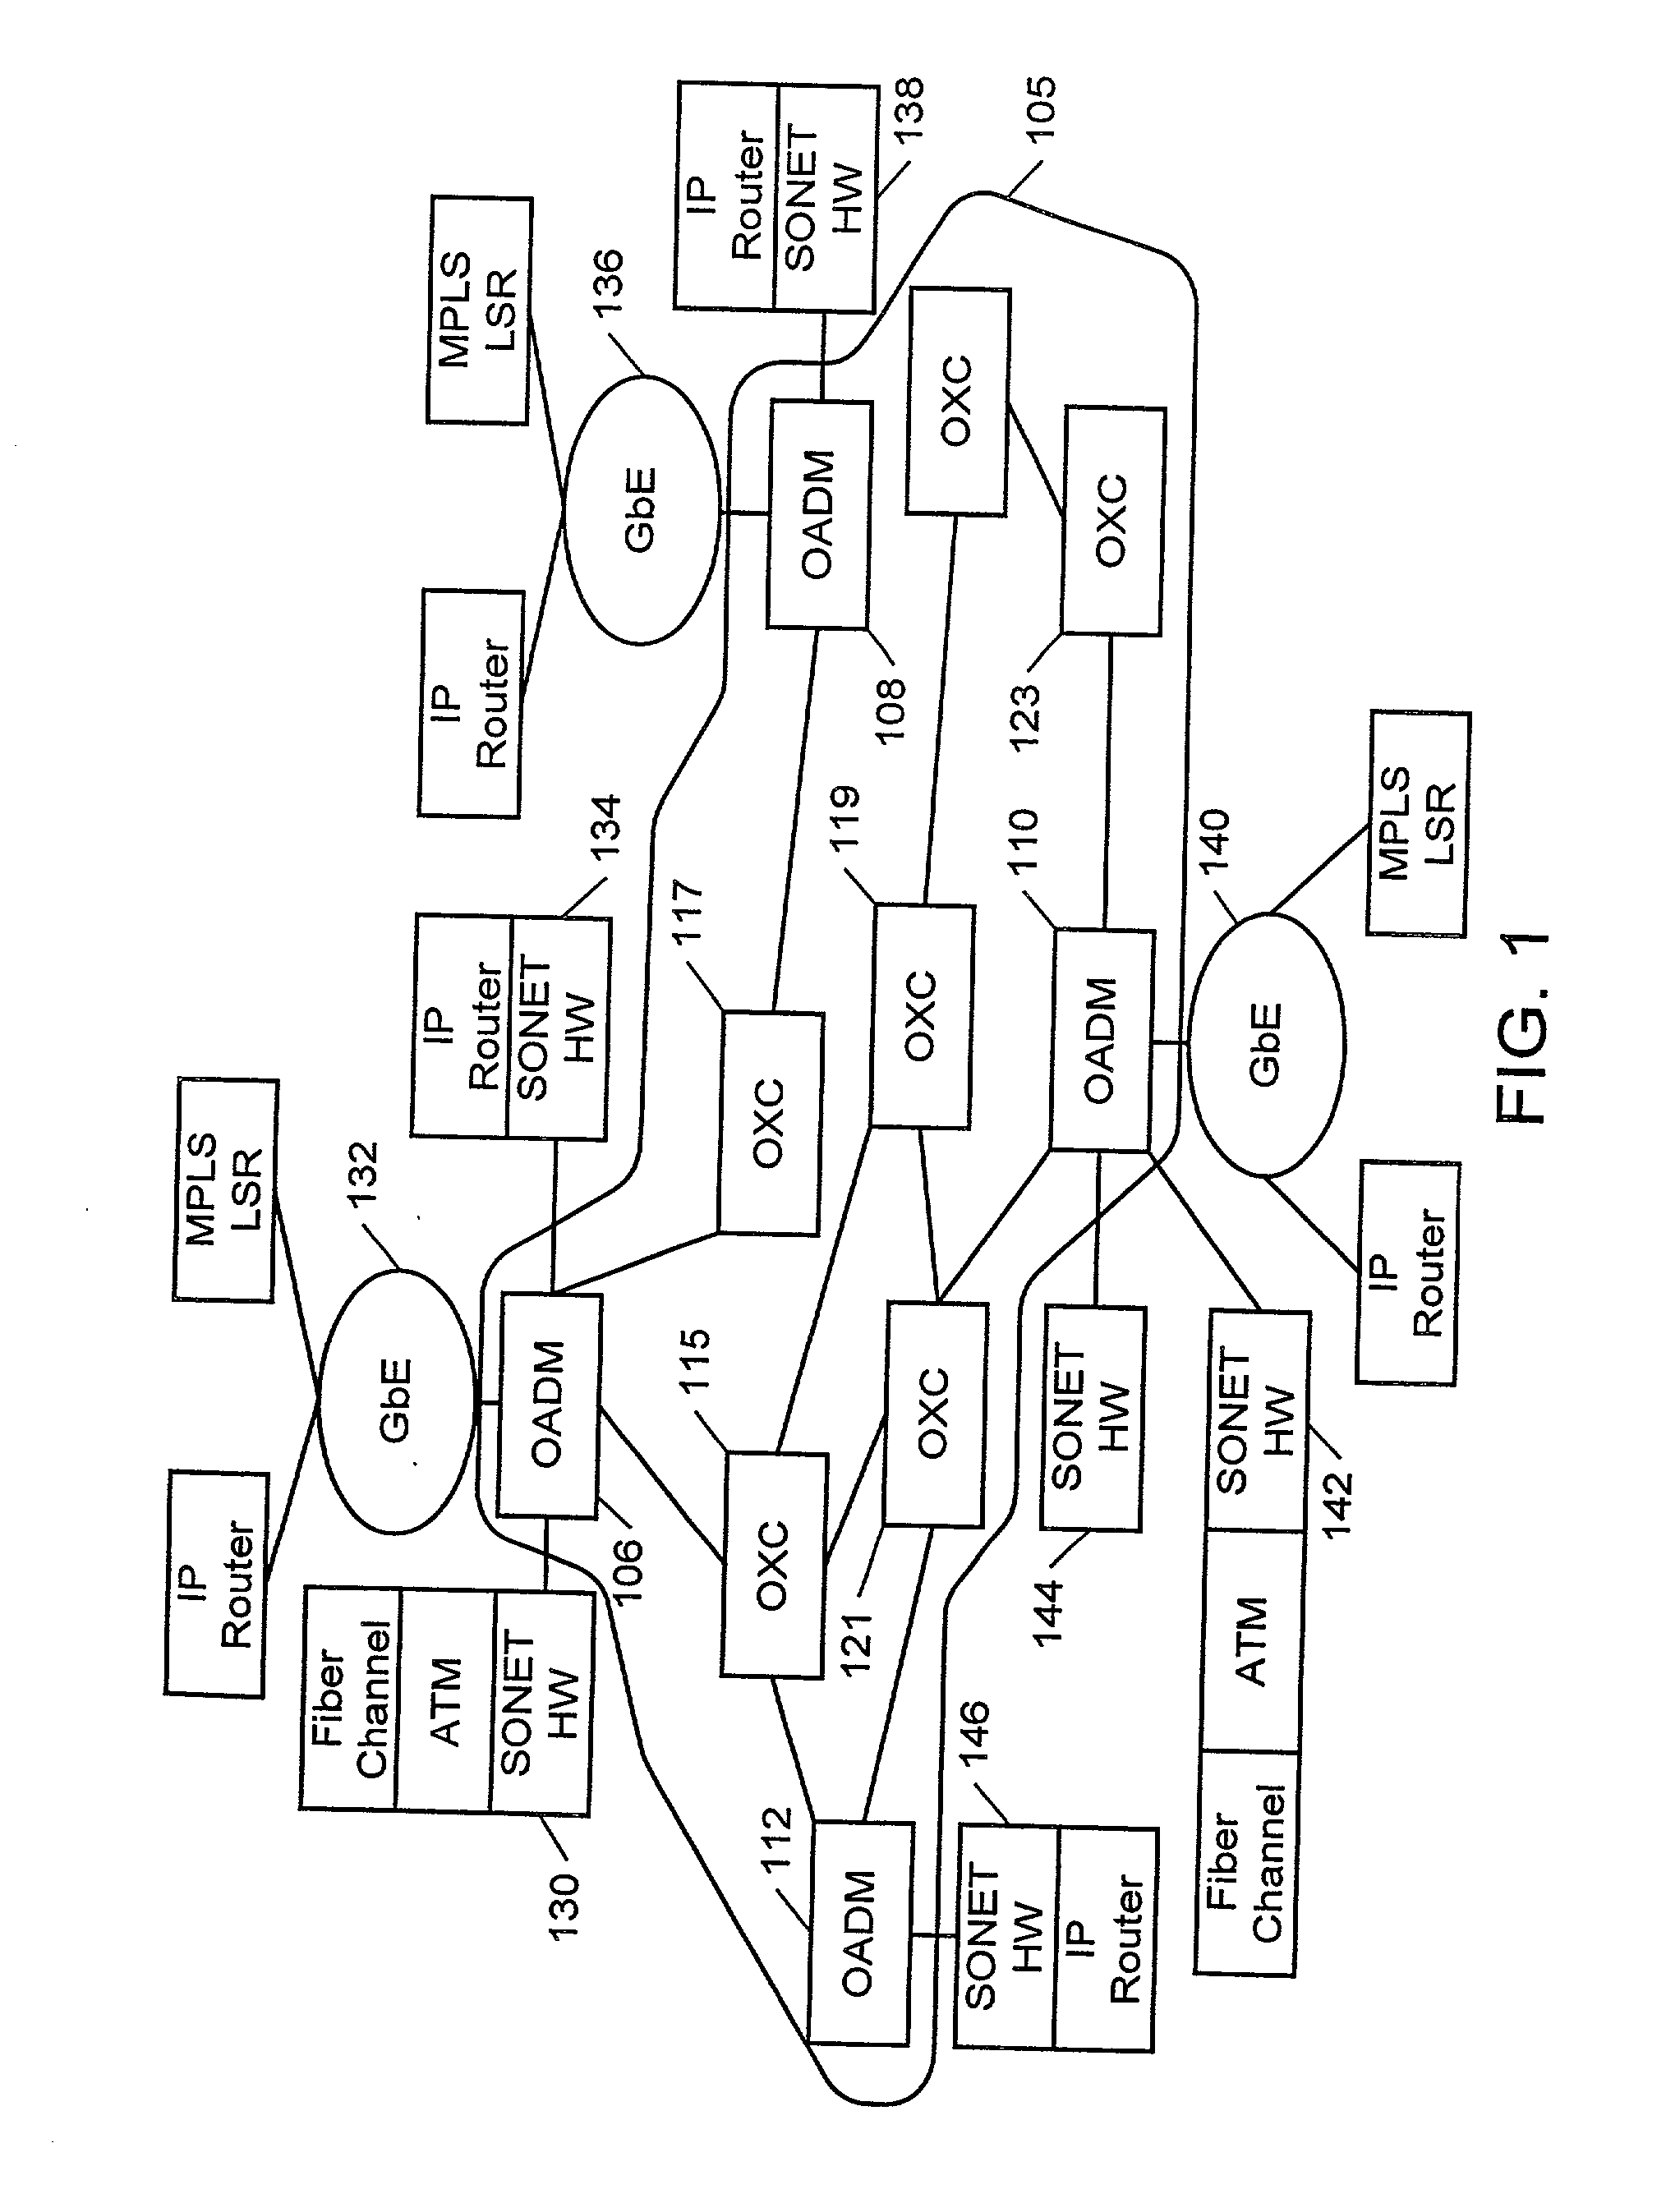 Protection switching for an optical network, and methods and apparatus therefor